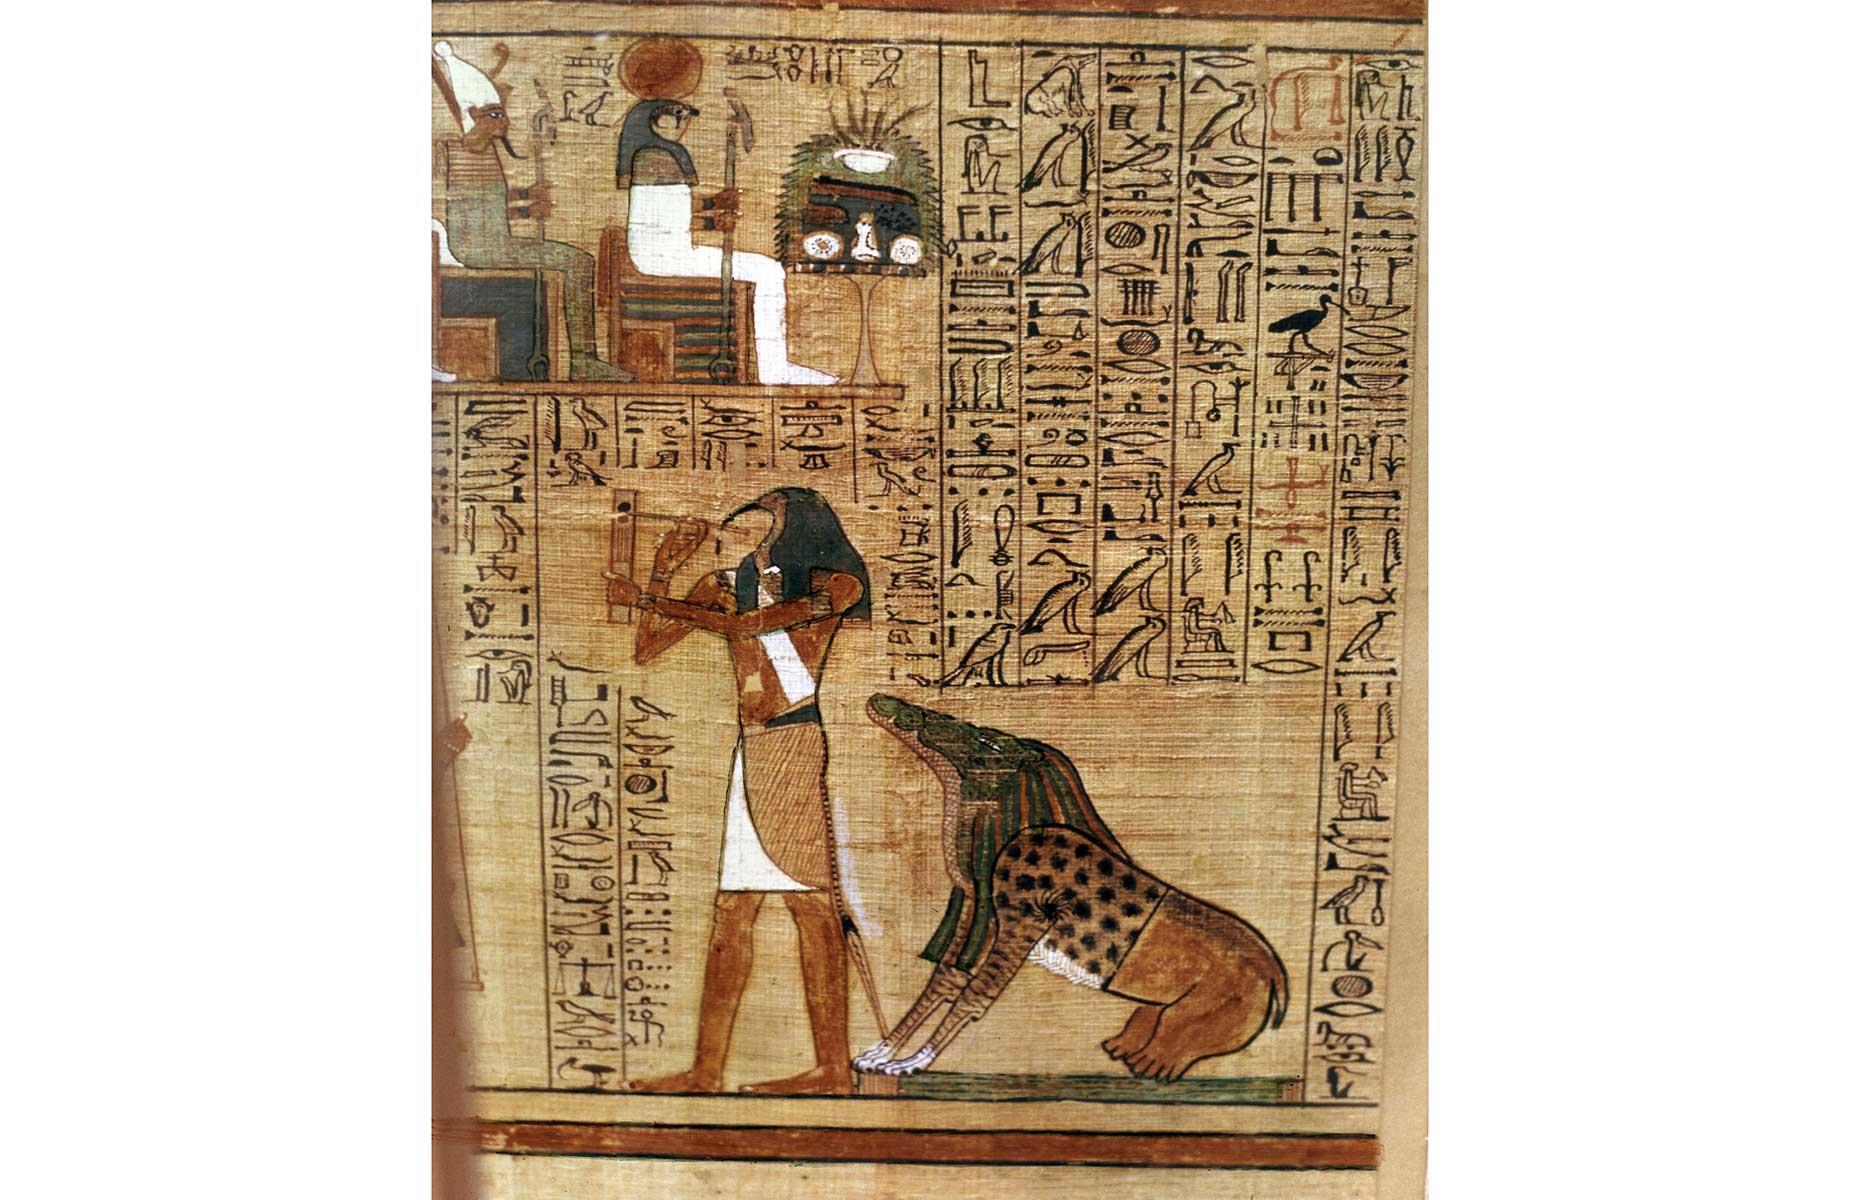 <p>The Book of the Dead is the umbrella term for a series of ancient Egyptian texts. Specific chants (or 'utterances') were typically copied onto papyrus scrolls and placed in tombs, like the fragment from the tomb of Theban scribe Ani in Luxor pictured here, which dates back to 1250 BC and is <a href="https://www.britishmuseum.org/collection/object/Y_EA10470-3">on display at the British Museum</a>. This scene depicts the Hall of Judgement, with Ani muttering Spell 30B as his heart is weighed on the scales of justice, determining whether he'd make it to paradise or not. Spells from the Book of the Dead also adorned mummy bandages and even Tutankhamun's golden death mask.</p>